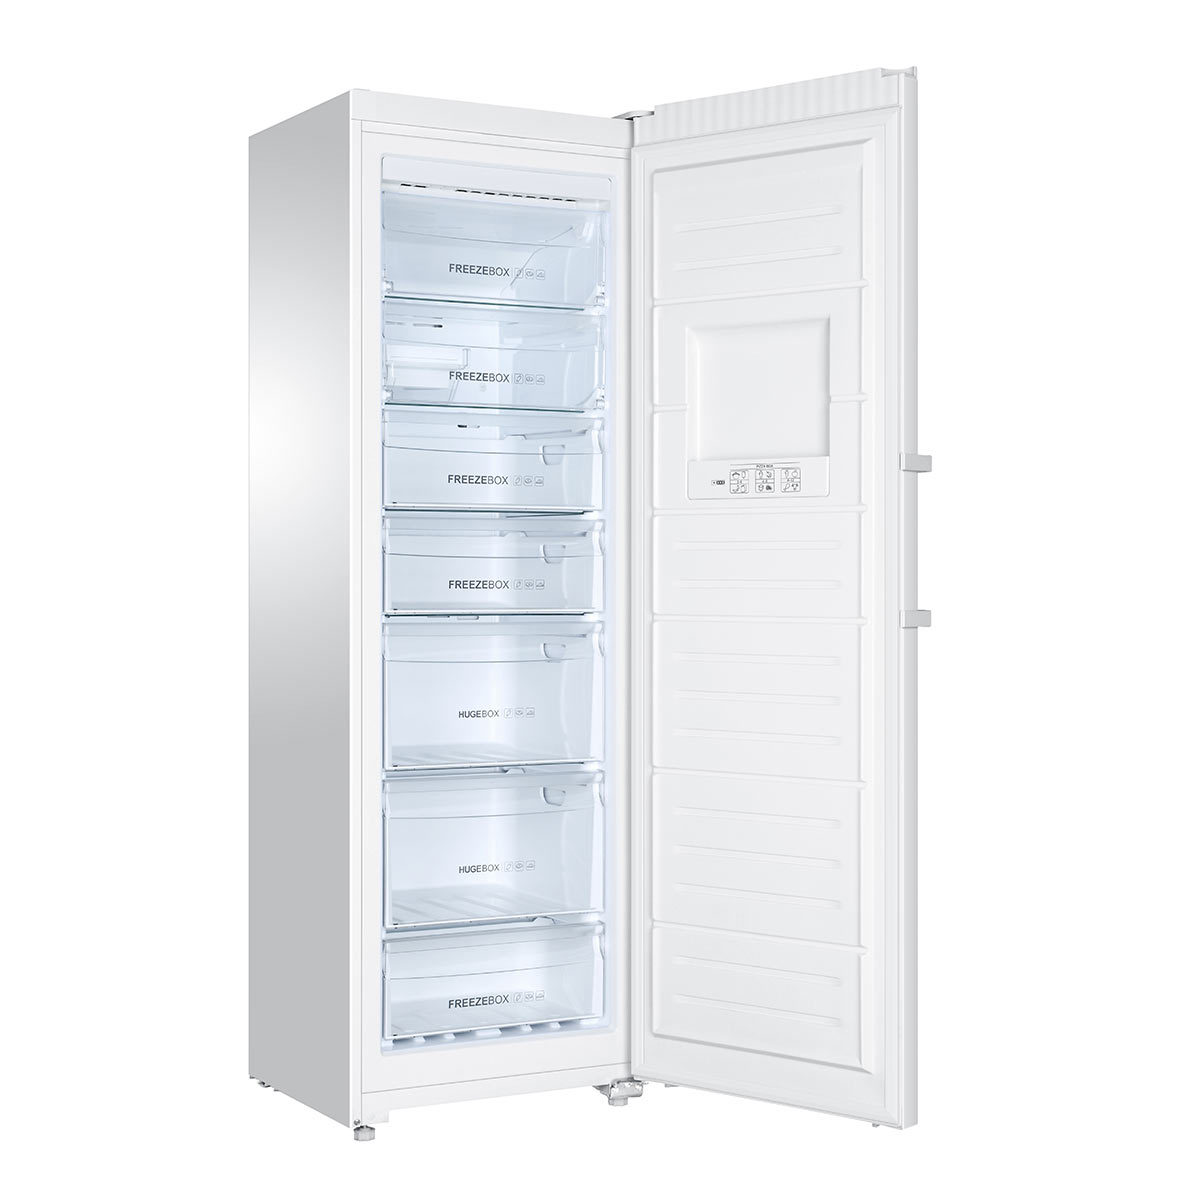 Haier H2F-255WSAA, Freezer, E Rated in White